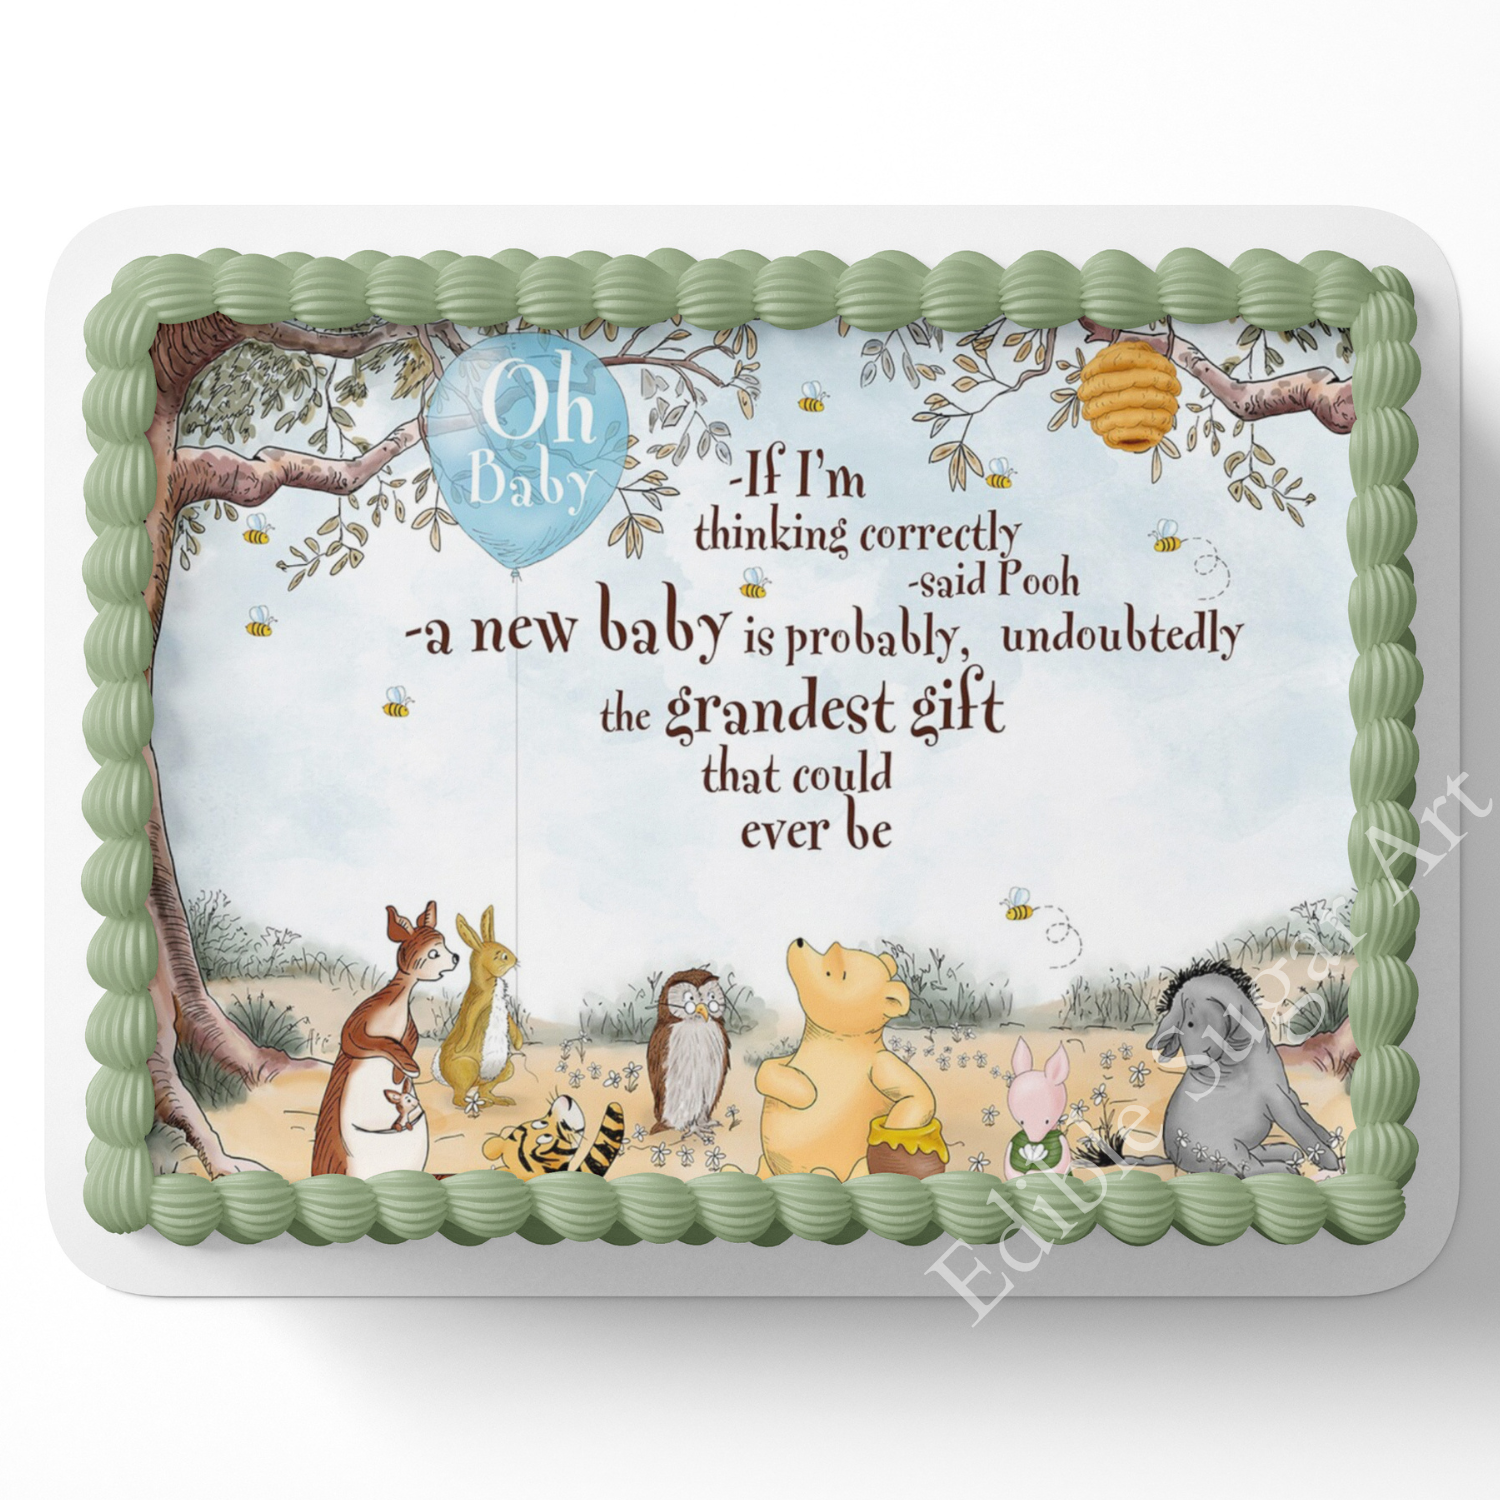 Primary image for POOH BEAR BABY Shower Cake Topper Edible Image pooh bear book Nursery decoration